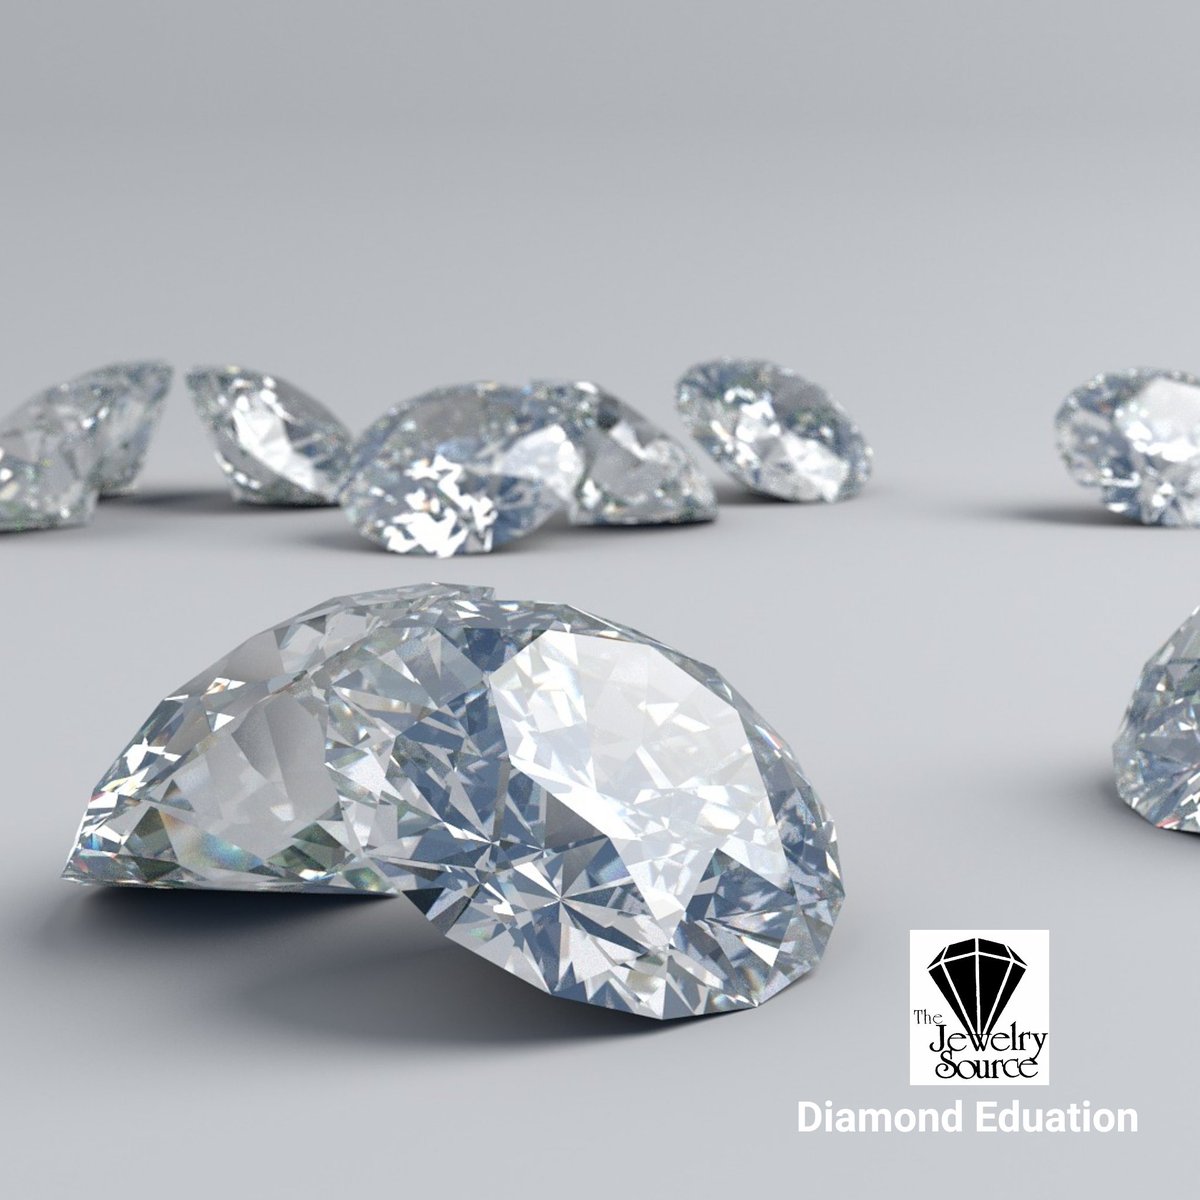 The Jewelry Source Diamond Education

For more information call us today at (310) 322-7110 or visit our website: jewelrysourceusa.com/pages/four-cs
Shopping for diamonds? jewelrysourceusa.com/diamonds
#jewelrysourceusa #diamonds #diamondeducation #4csofdiamonds #askforAGS #CraftedbyInfinity